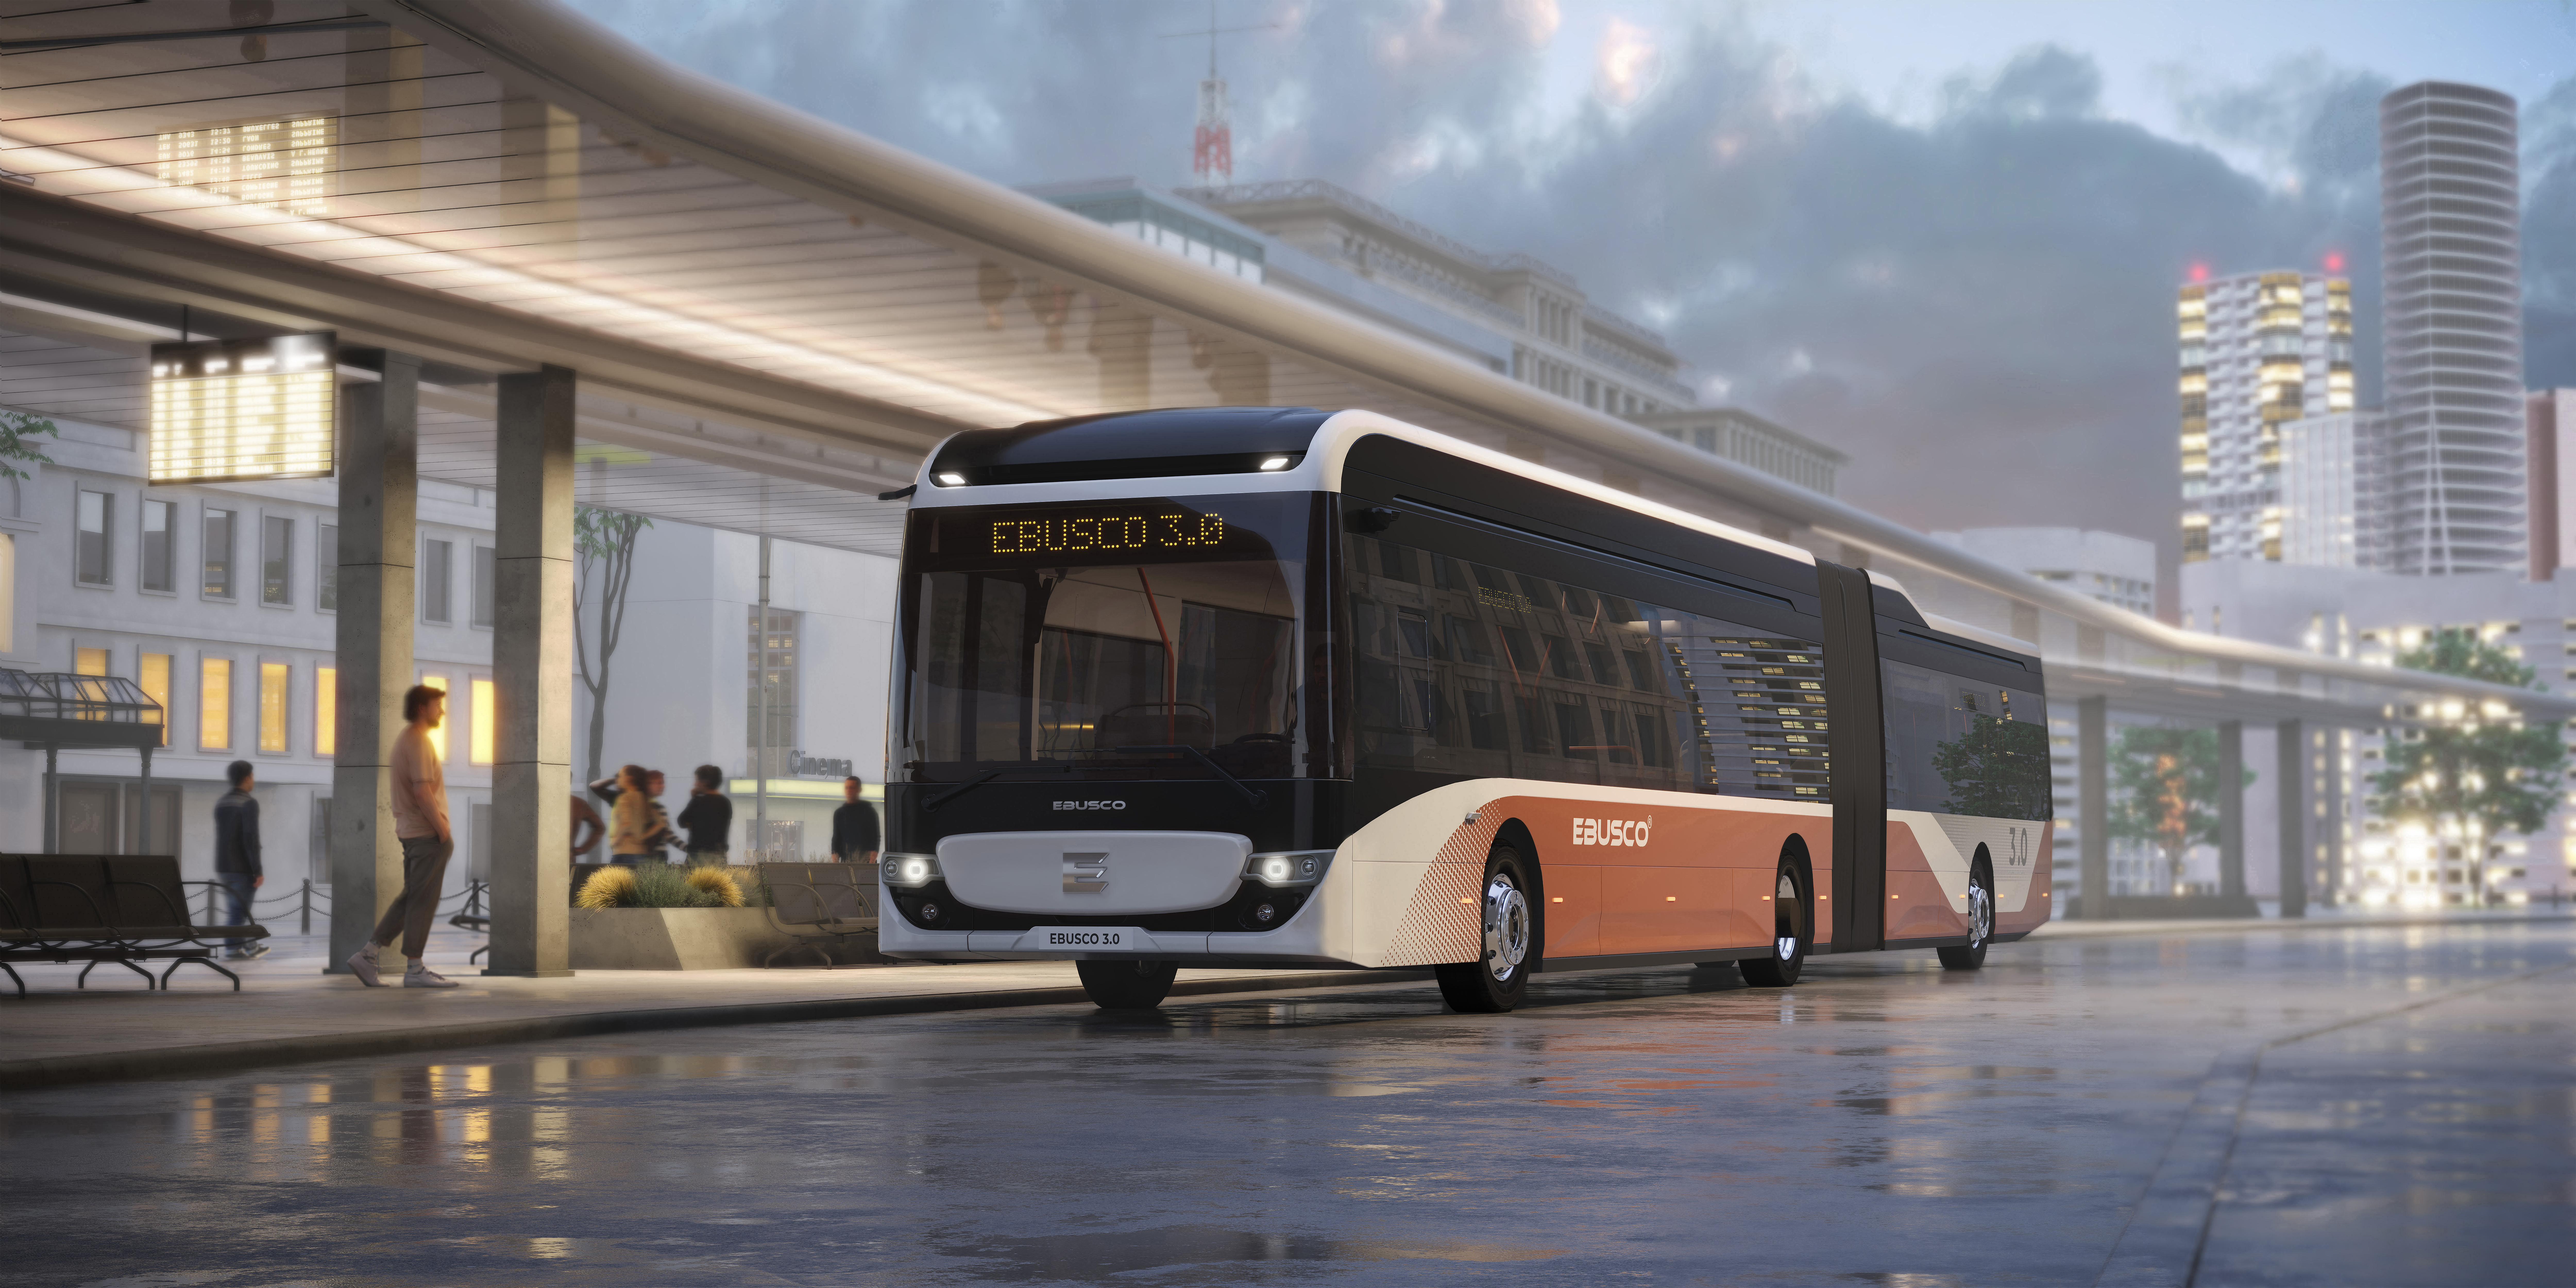 Dutch Ebusco reveals lightweight electric articulated bus with 700 km range